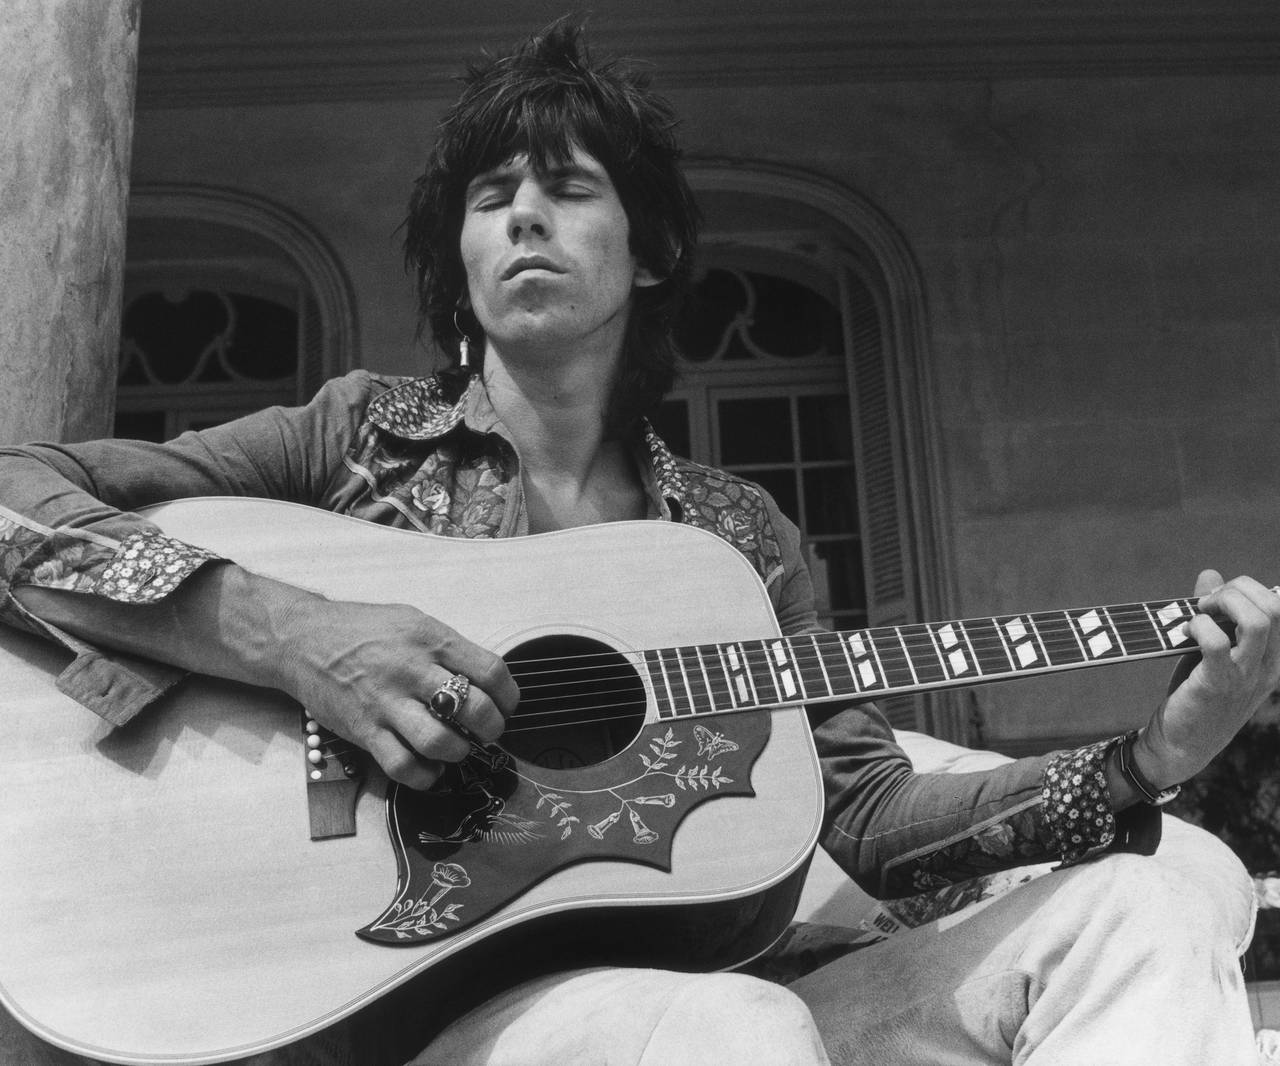 Dominique Tarle Portrait Photograph - Keith Richards, Closed Eyes, Black & White Photography, Fine Art Print, Signed